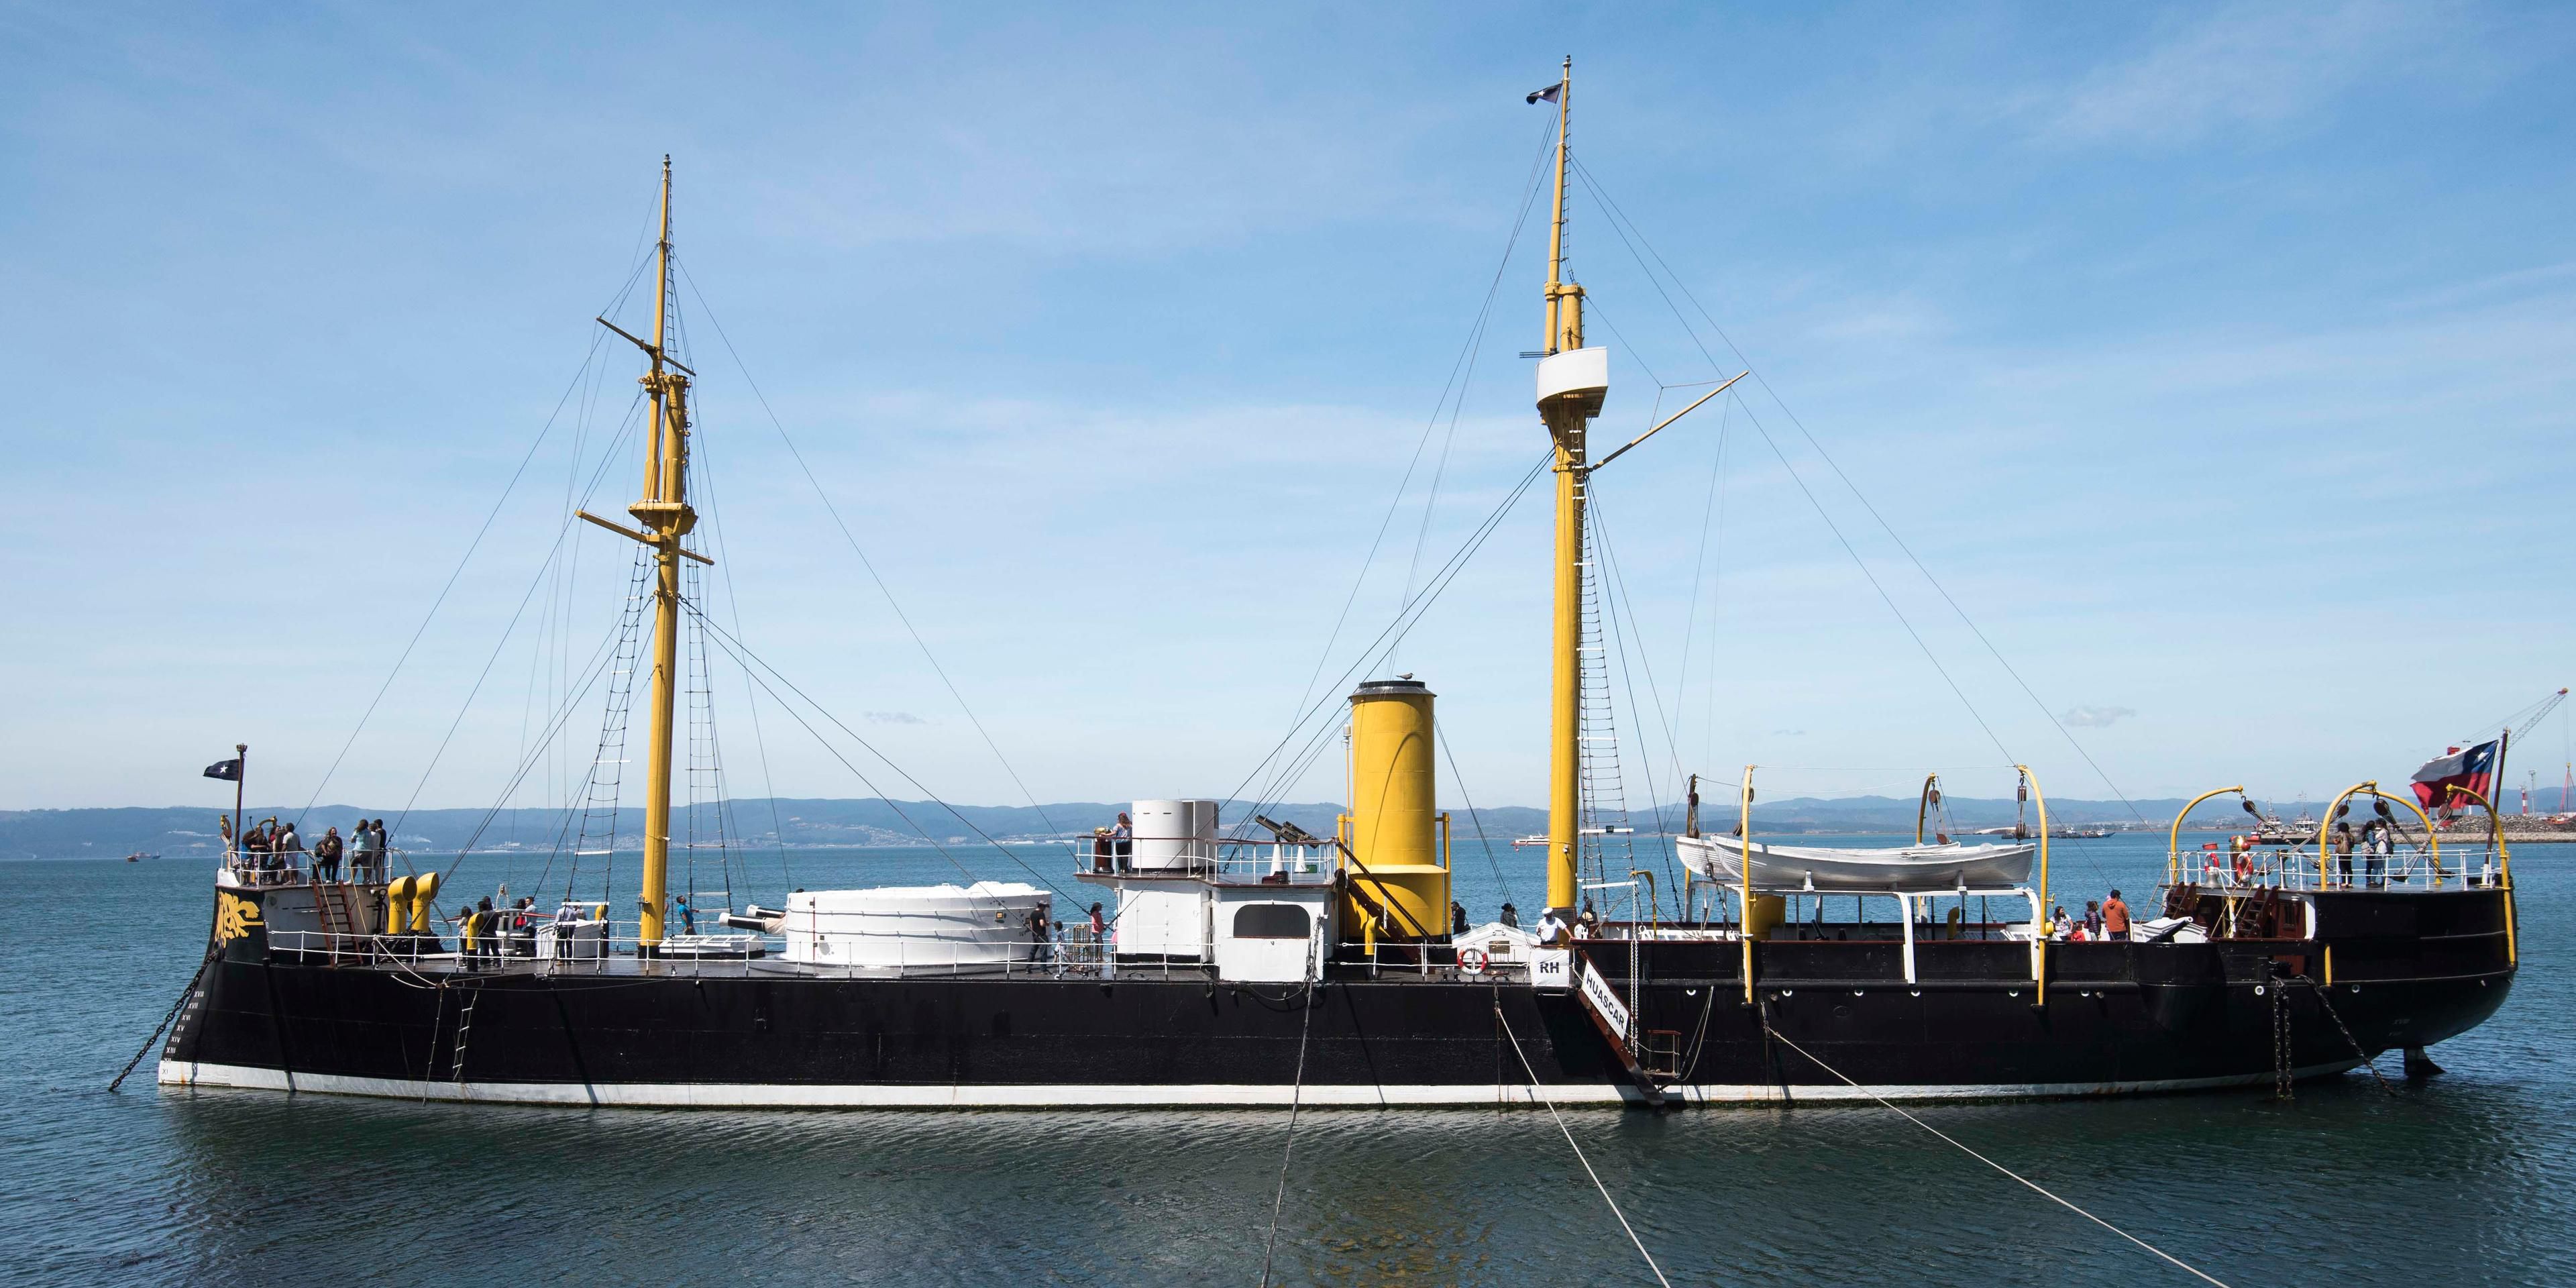 Delve into history visiting the Huascar Floating Museum in Talcahuano. Tour the ship that participated in the Naval Battle of Iquique, a true historical relic that is still afloat.